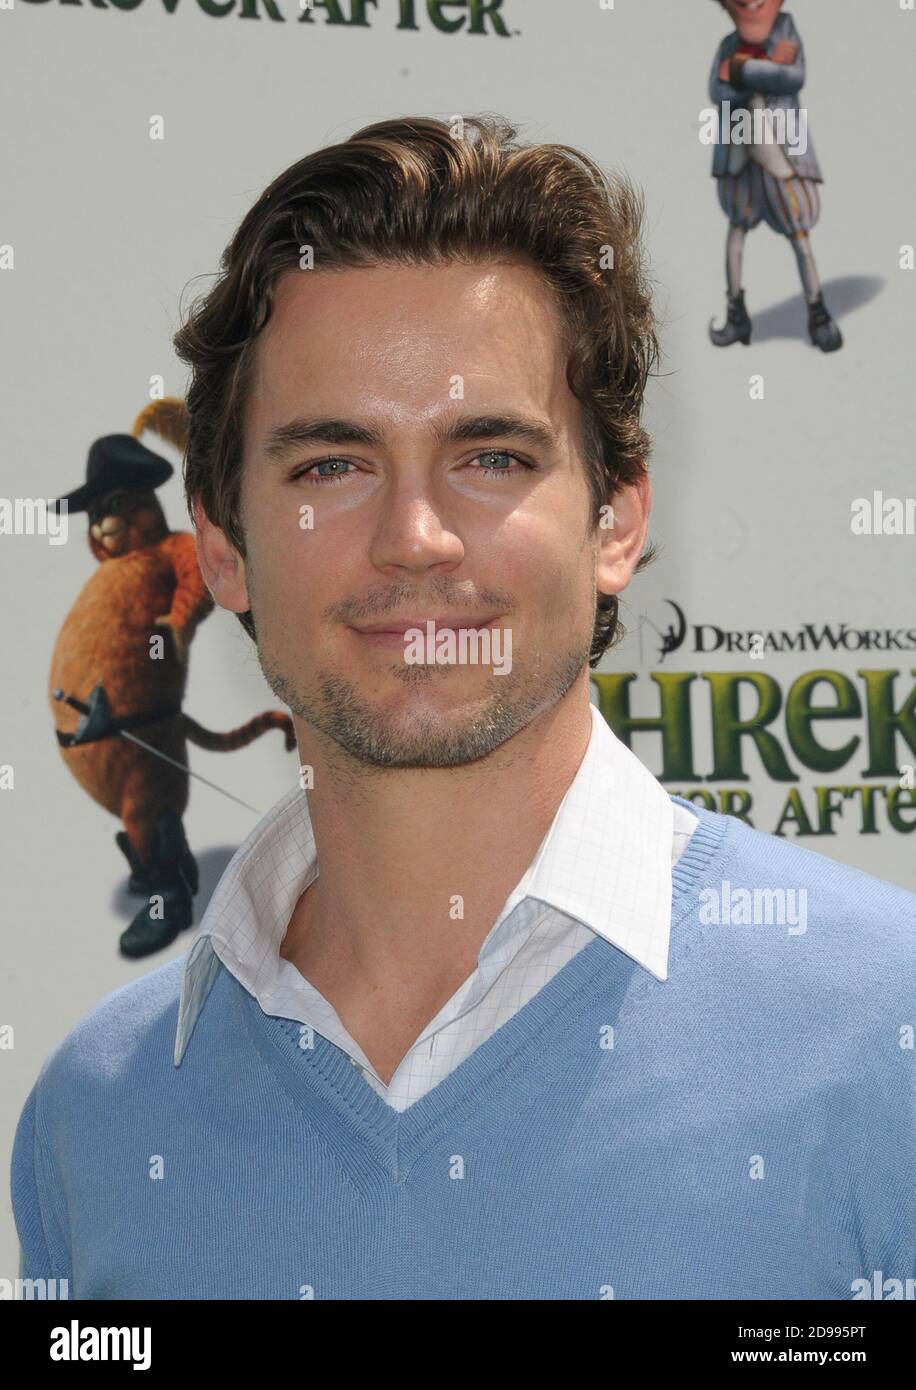 Matt Bomer arrives at the premier Shrek Forever After" at Gibson Amphitheatre on May 16, 2010 in Universal City, California. Stock Photo